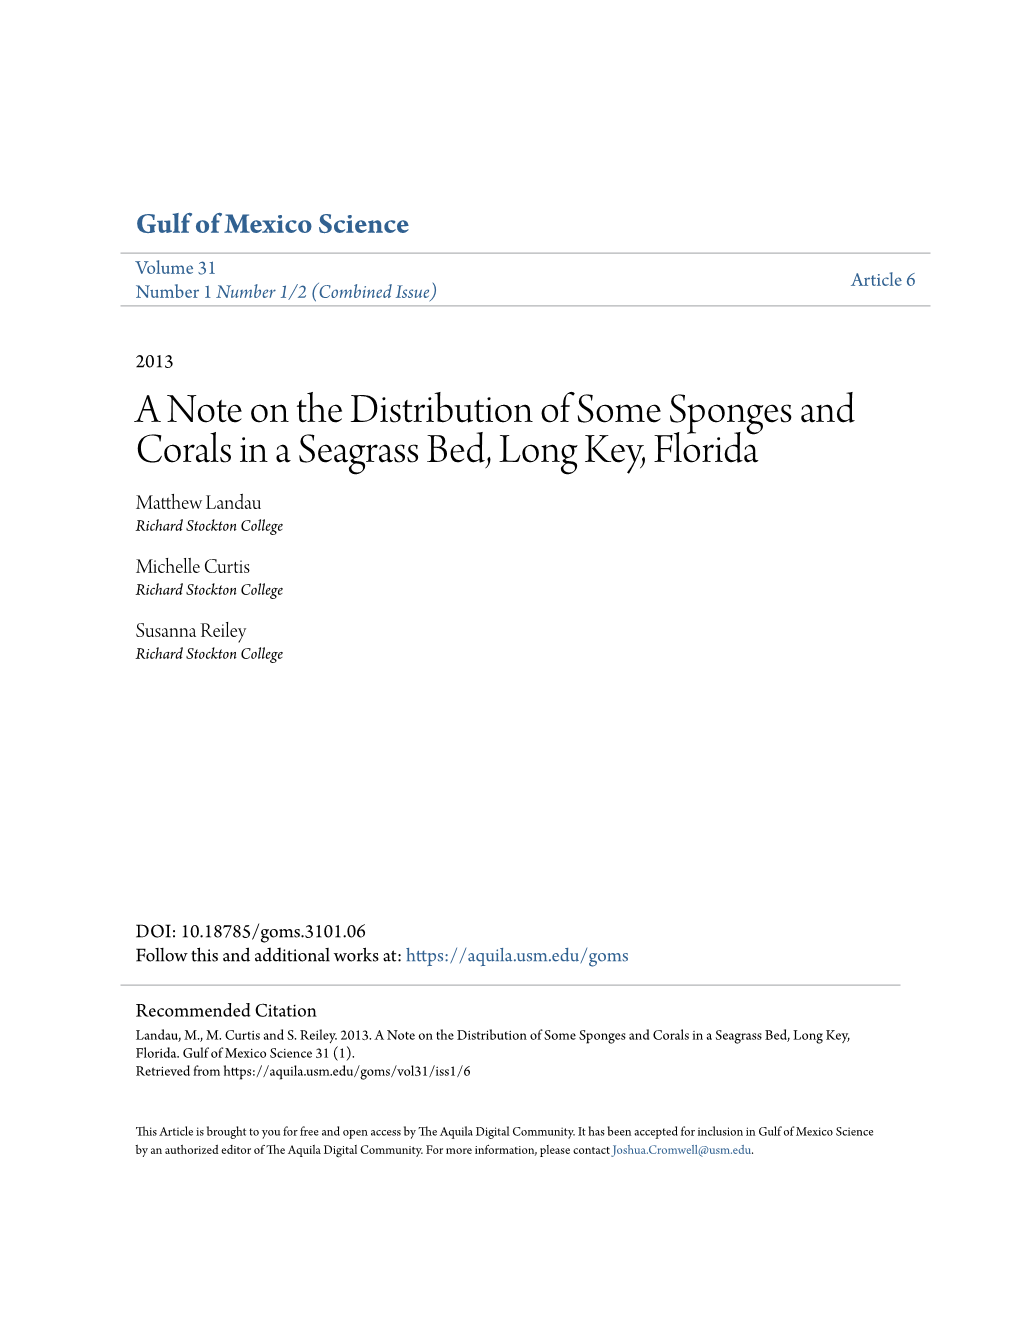 A Note on the Distribution of Some Sponges and Corals in a Seagrass Bed, Long Key, Florida Matthew Landau Richard Stockton College